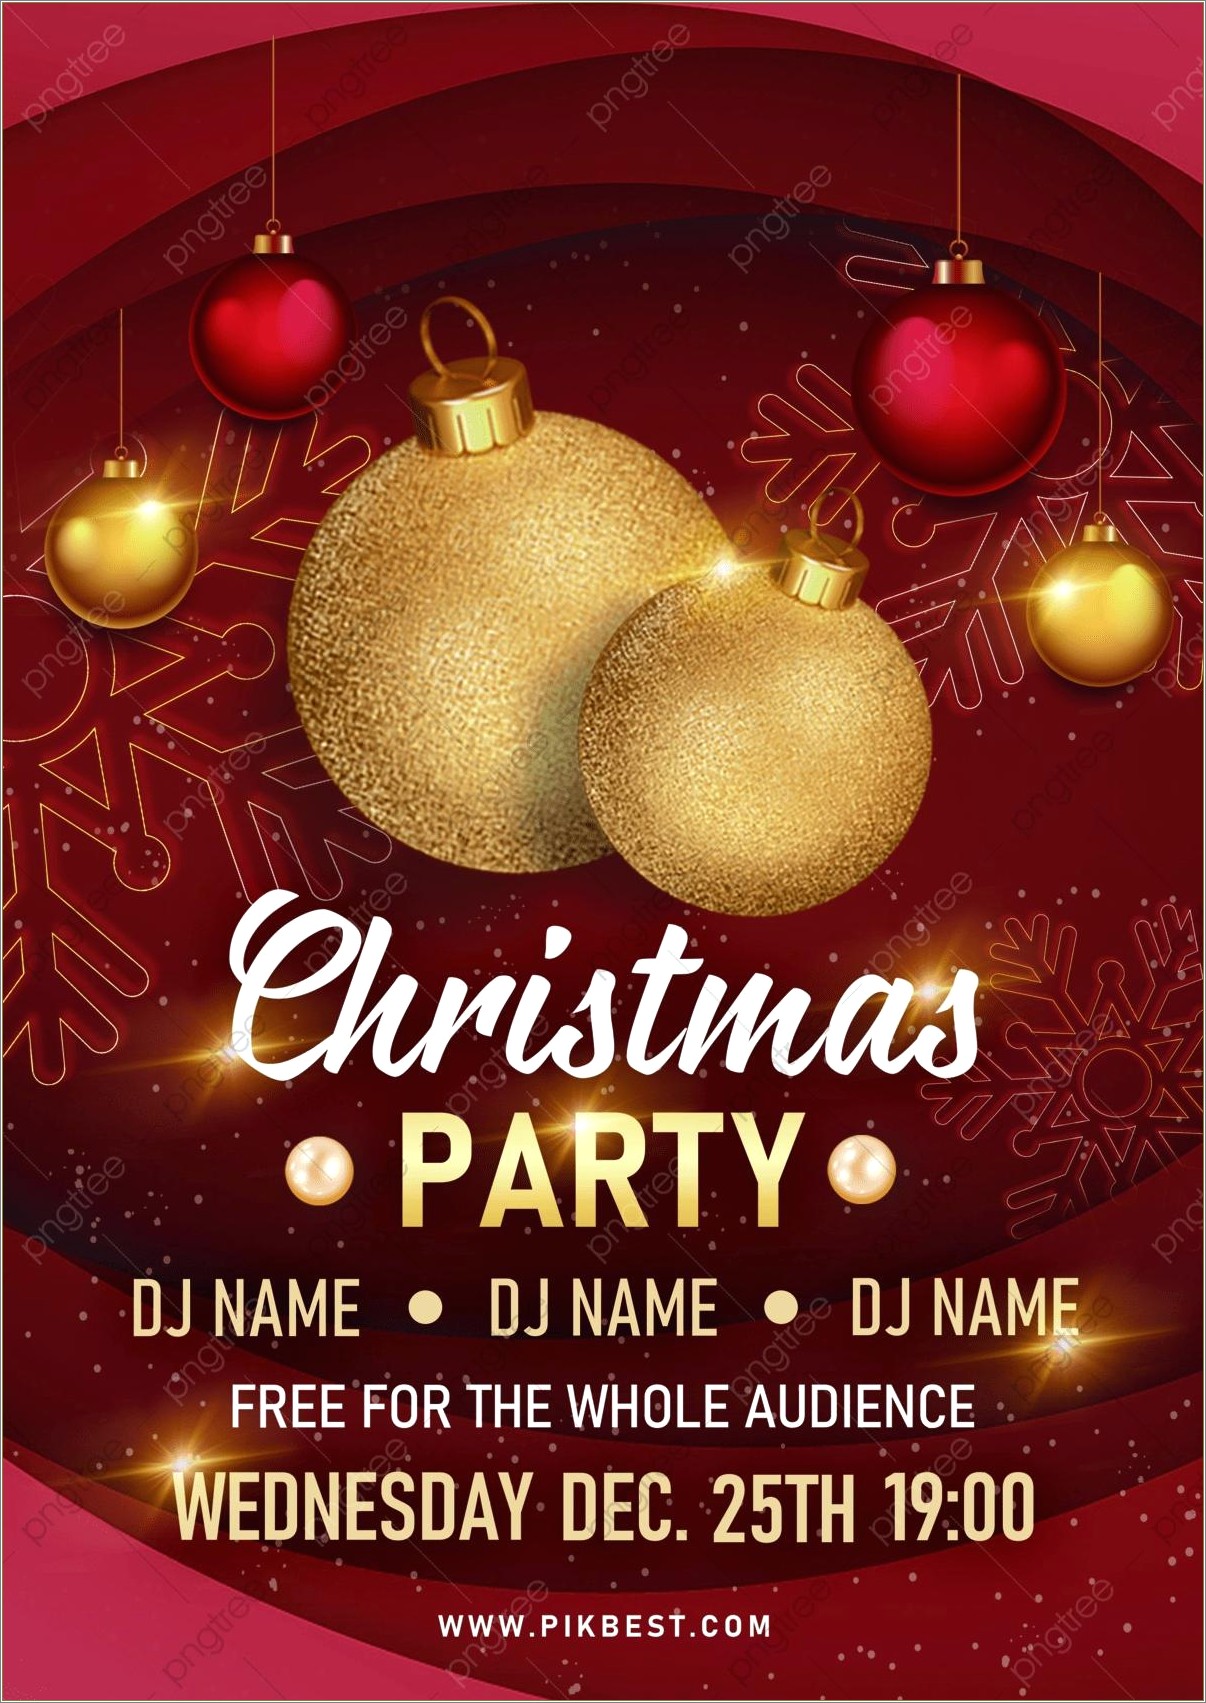 Christmas Cookies And Carols Flyer Template Free